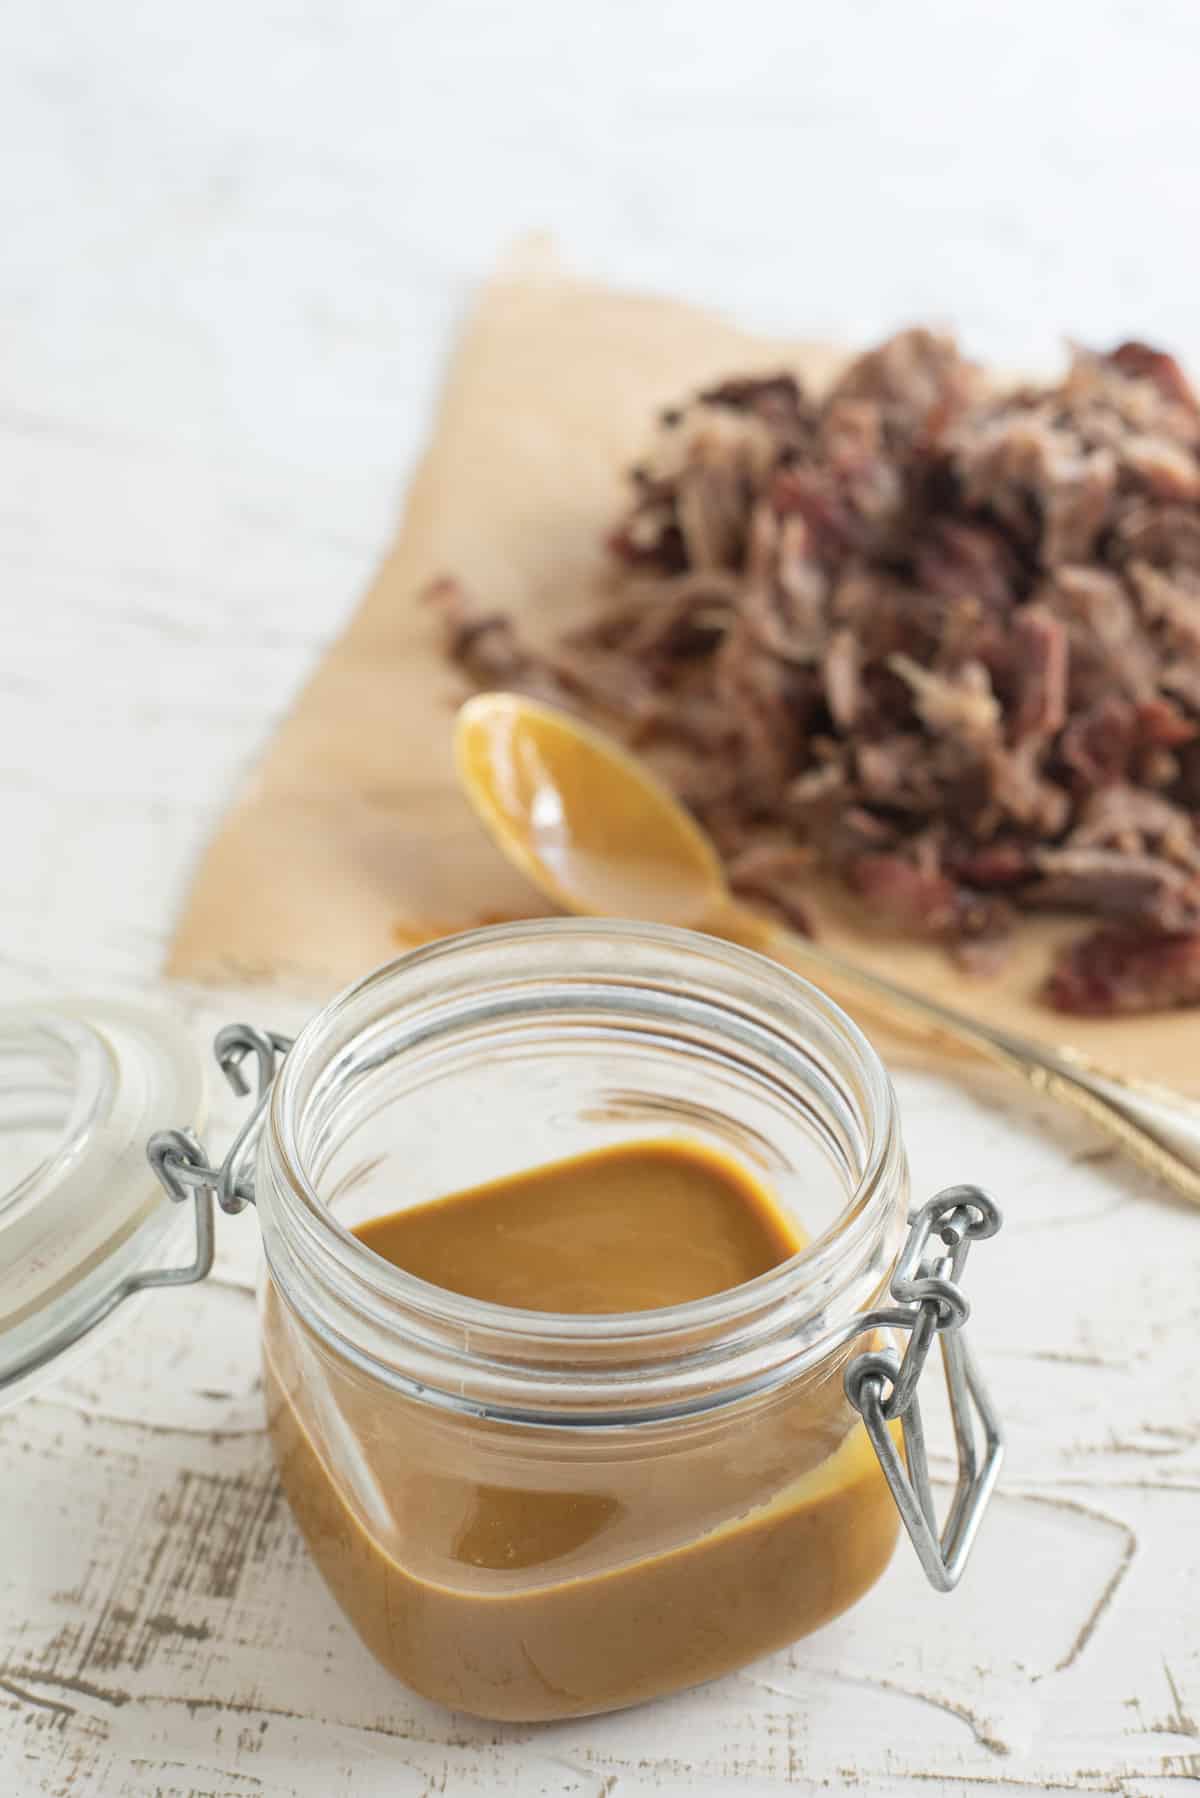 Georgia Mustard BBQ Sauce in a jar, pulled pork and spoon in background